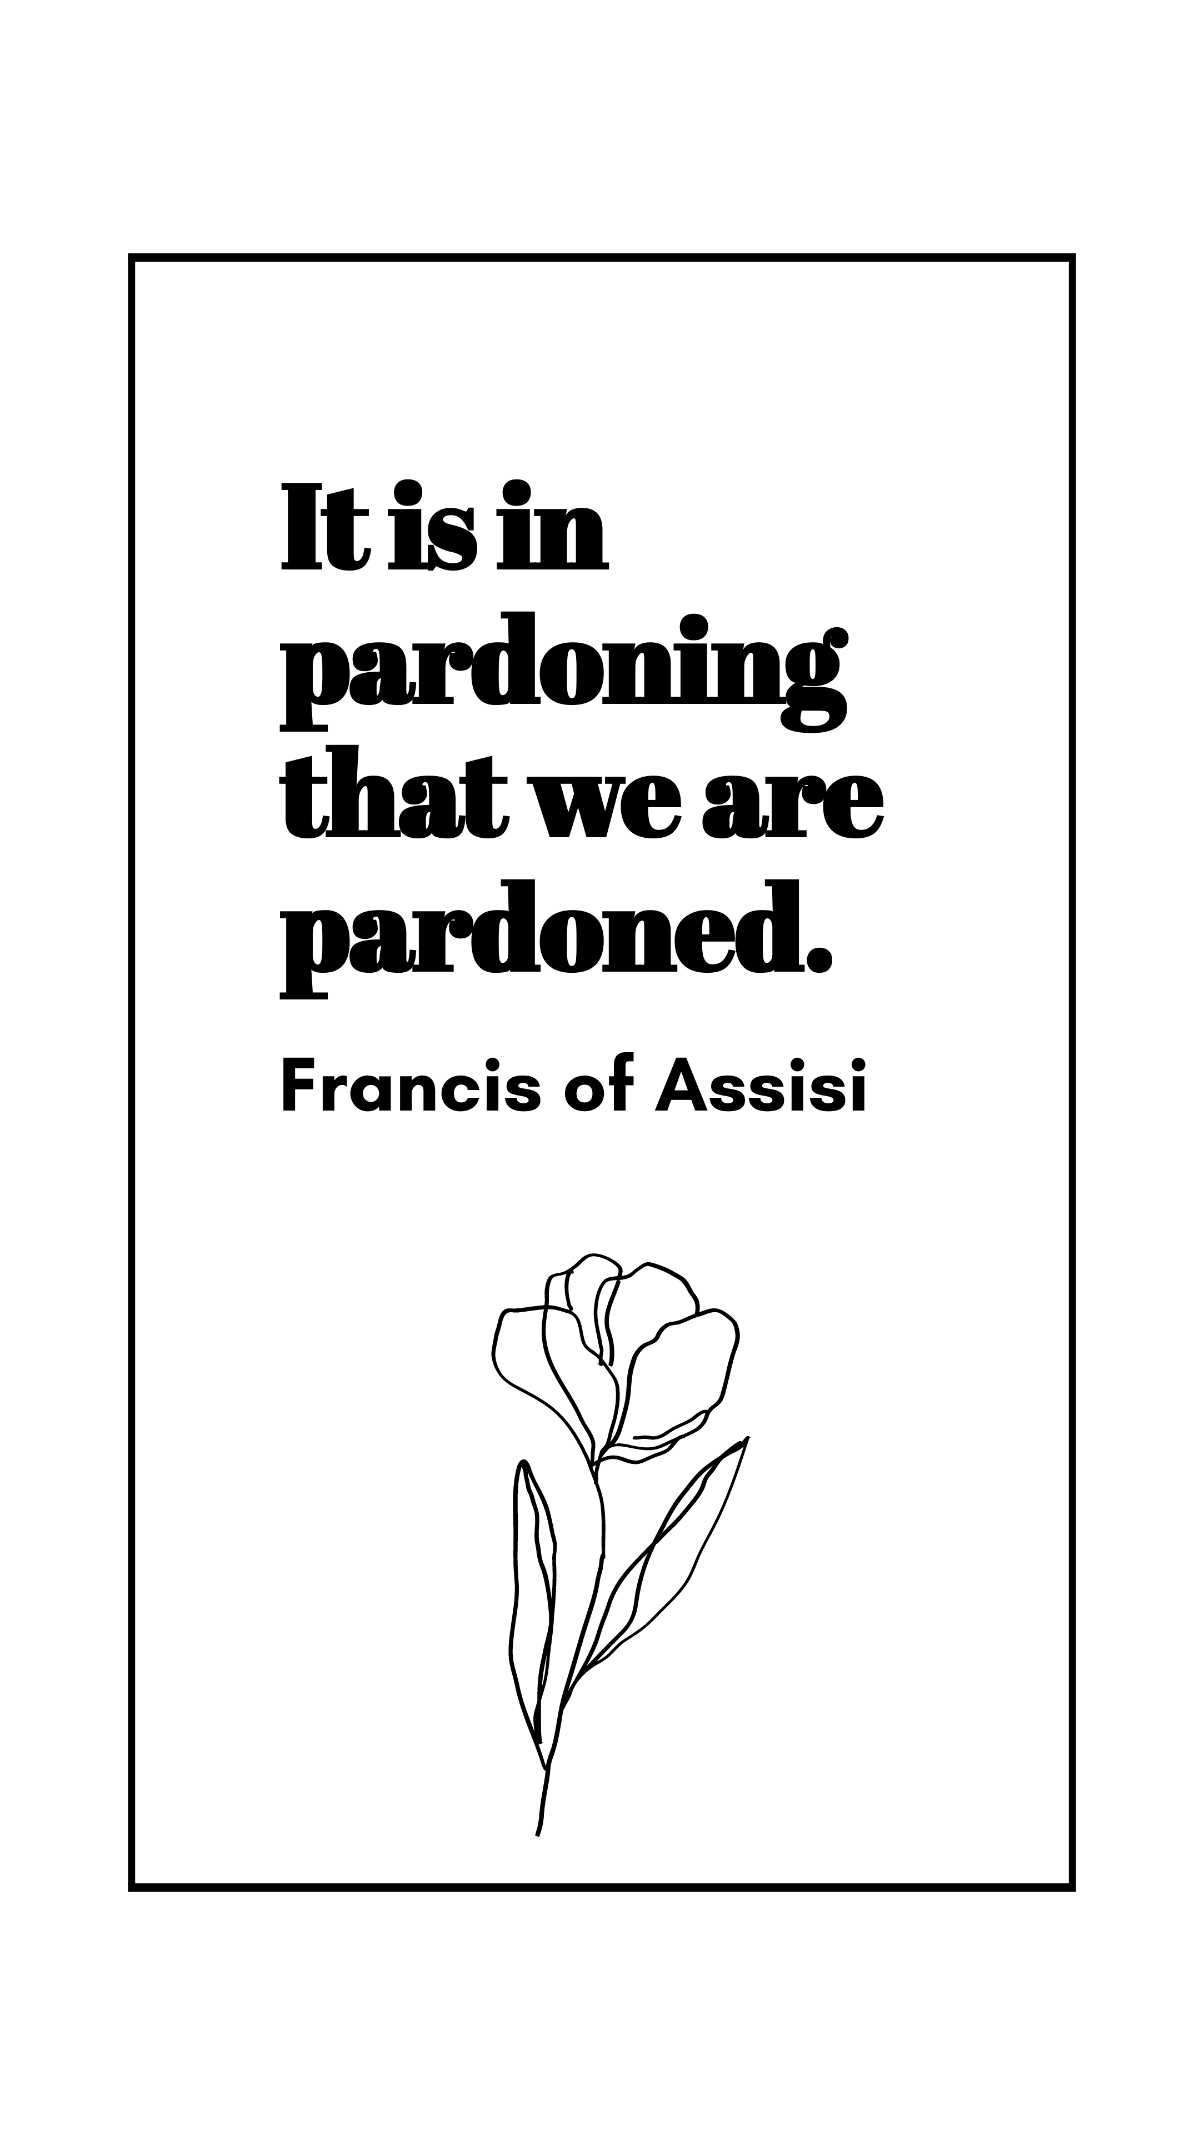 Francis of Assisi - It is in pardoning that we are pardoned. Template